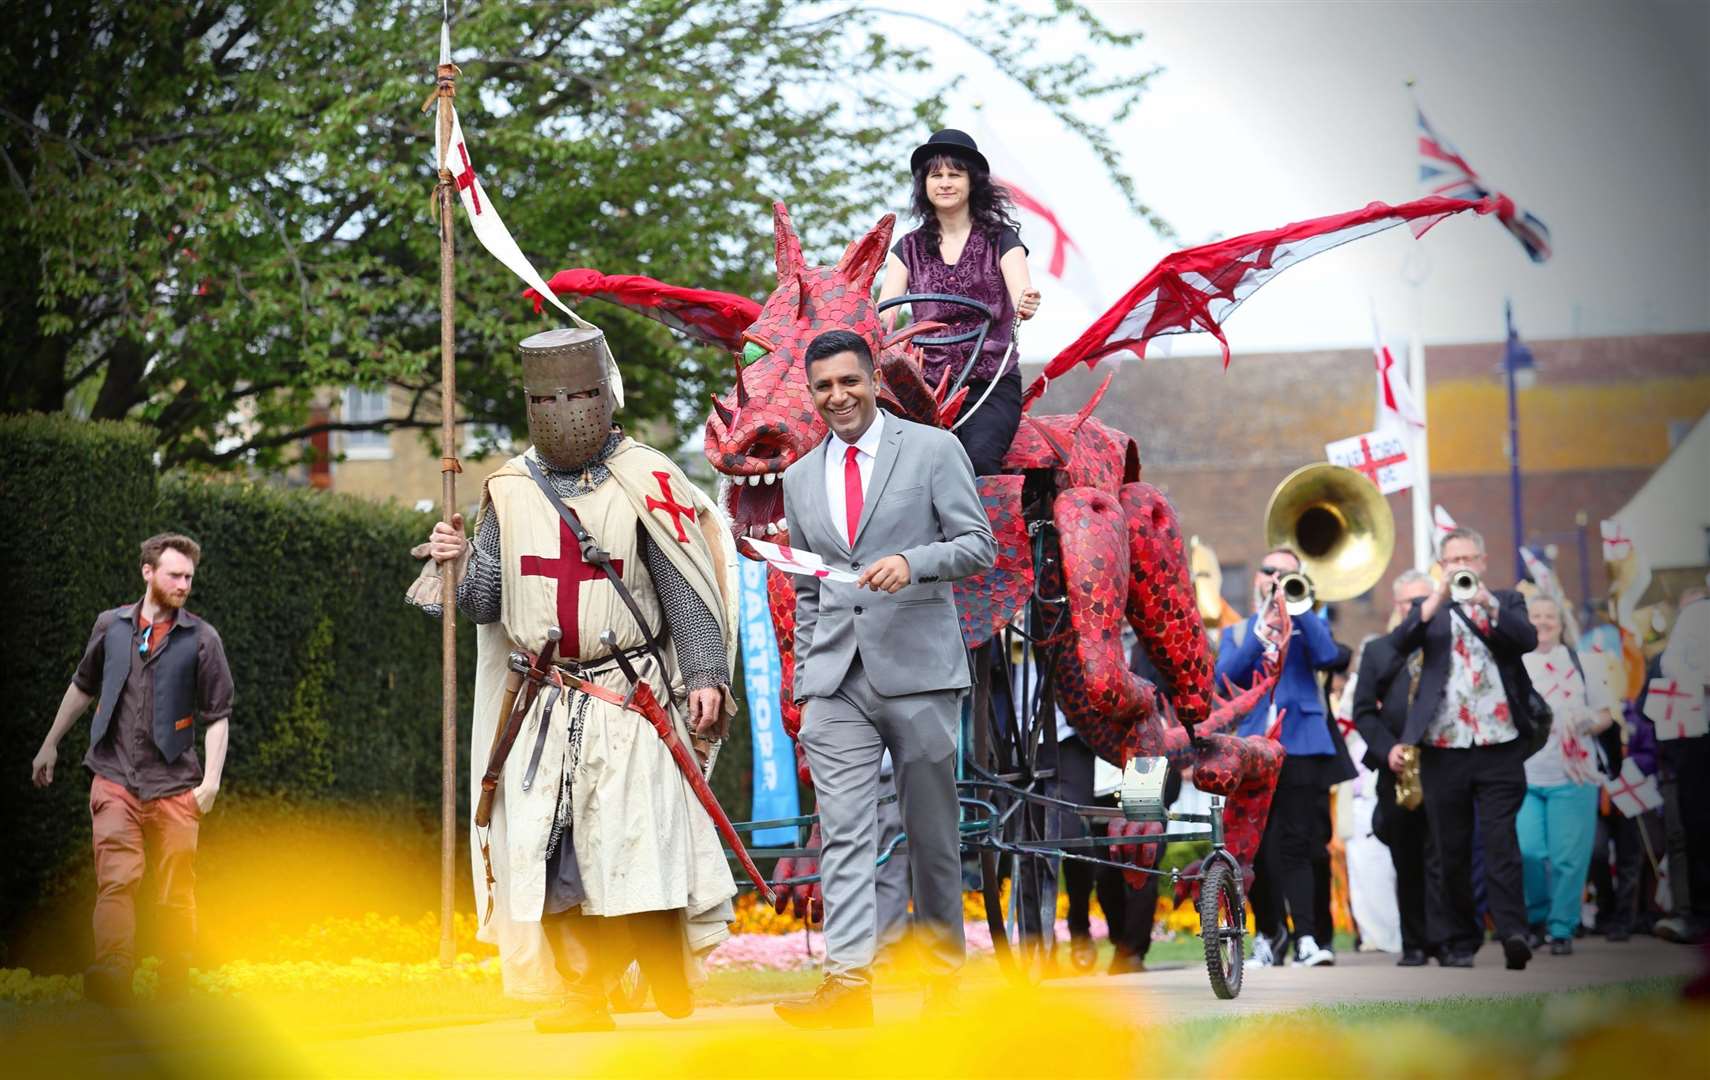 Gurvinder Sandher joined by a Saint George's knight during celebrations in 2018